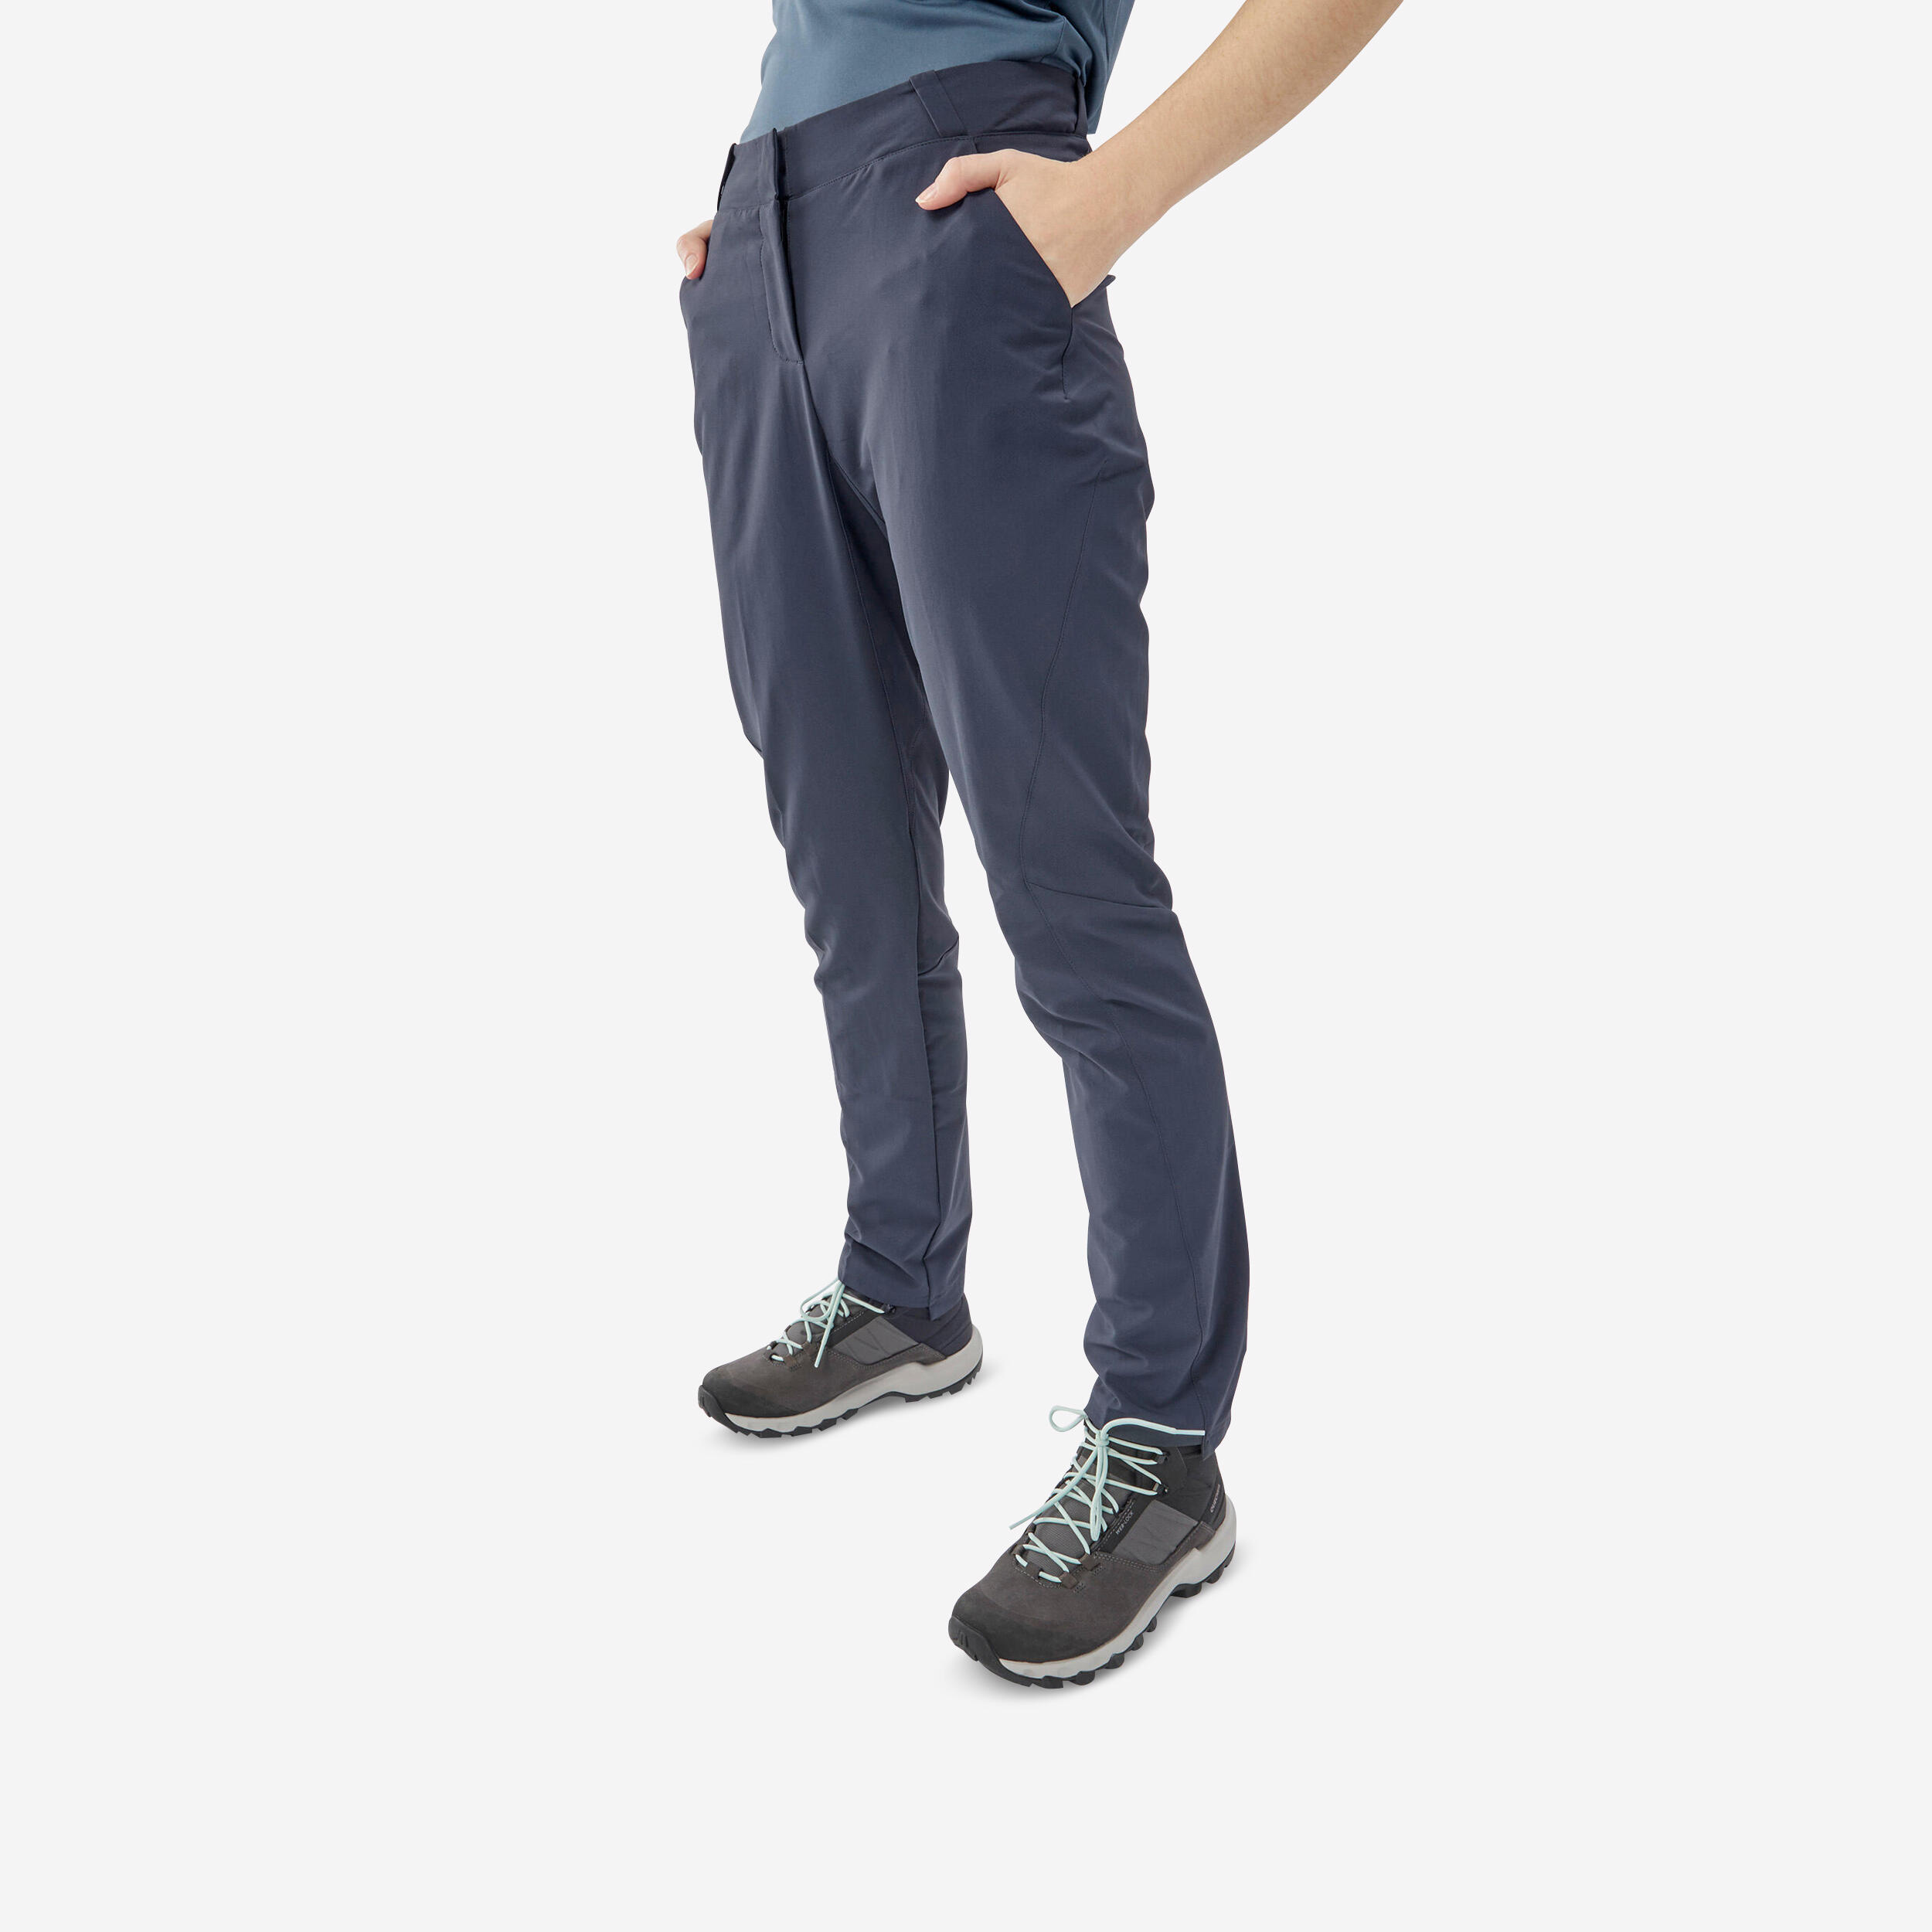 Women's Sports Trousers | Sports Pants for Ladies | Decathlon